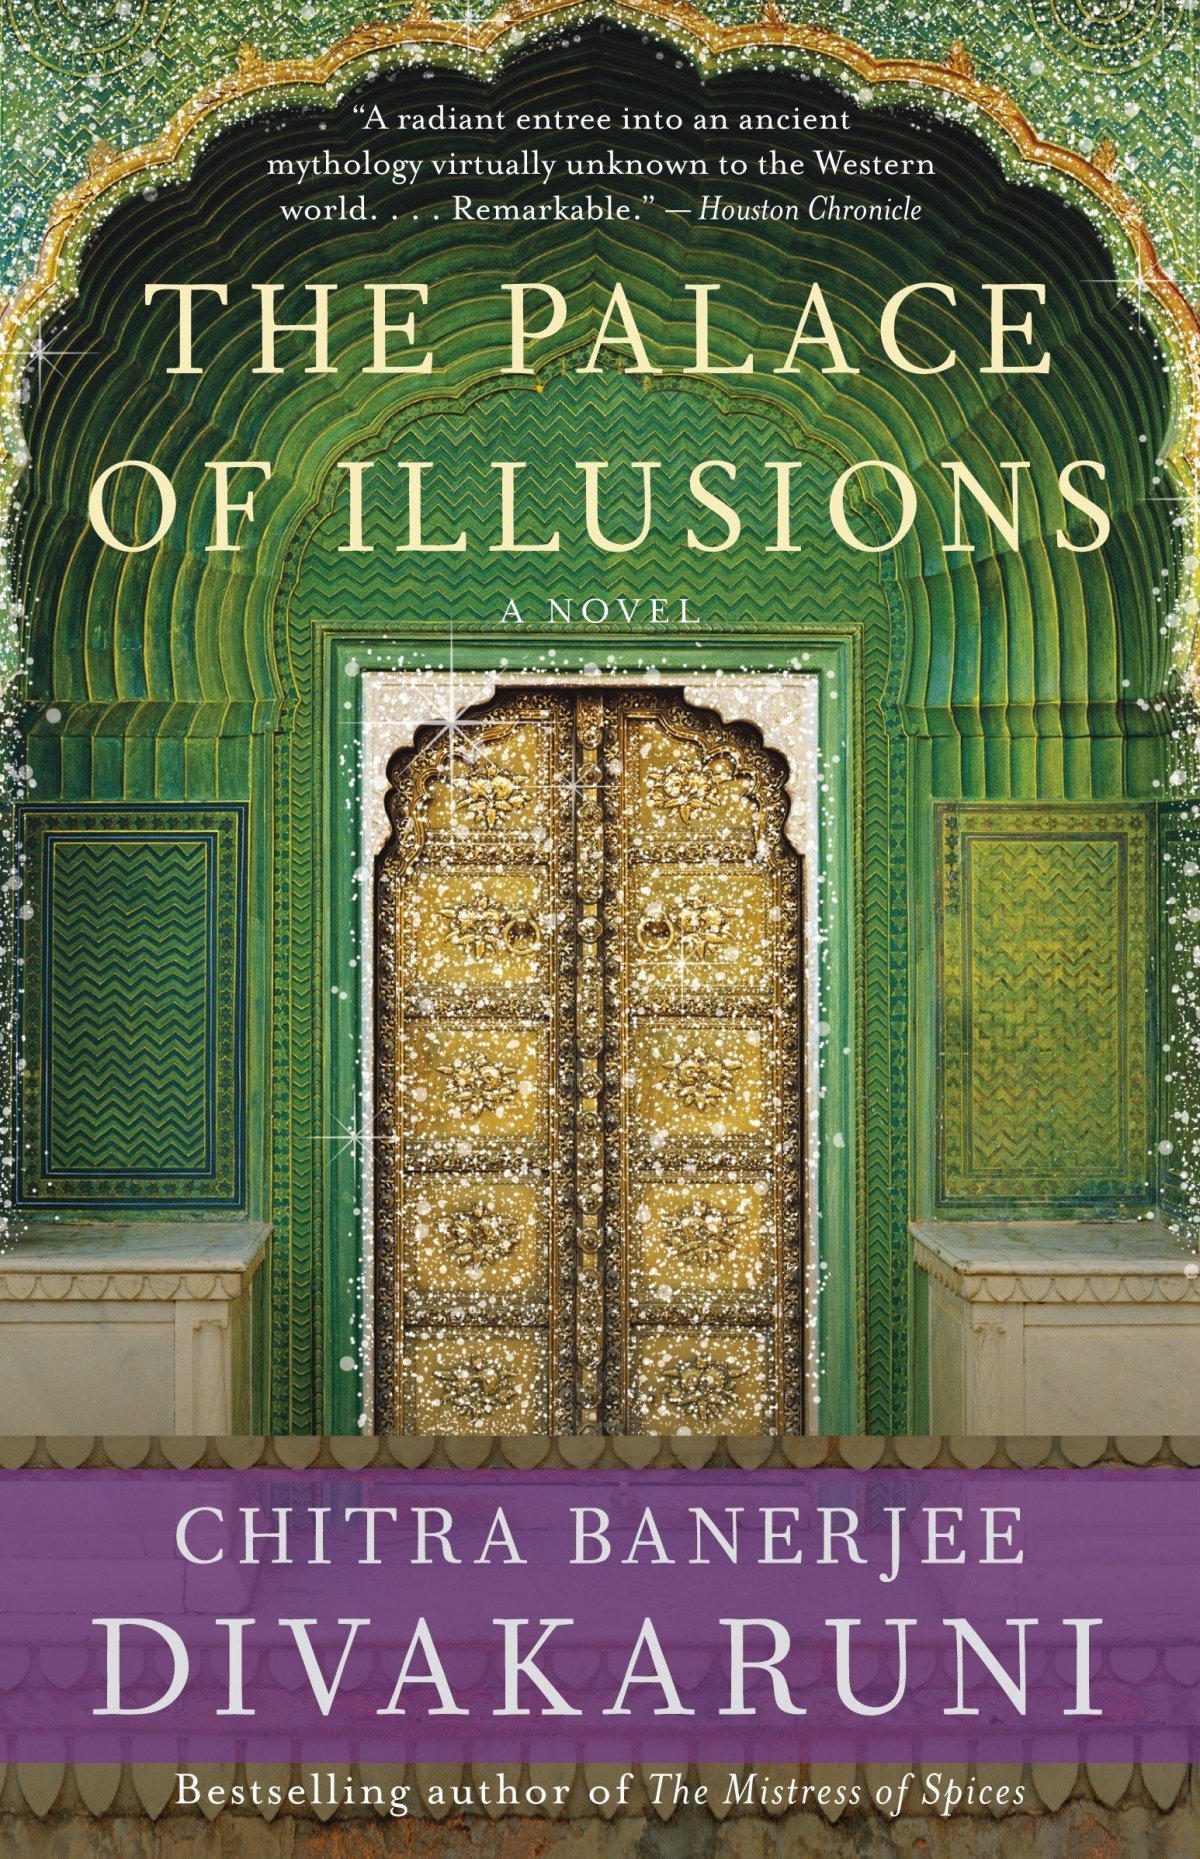 The Palace of Illusions Storyline and Review